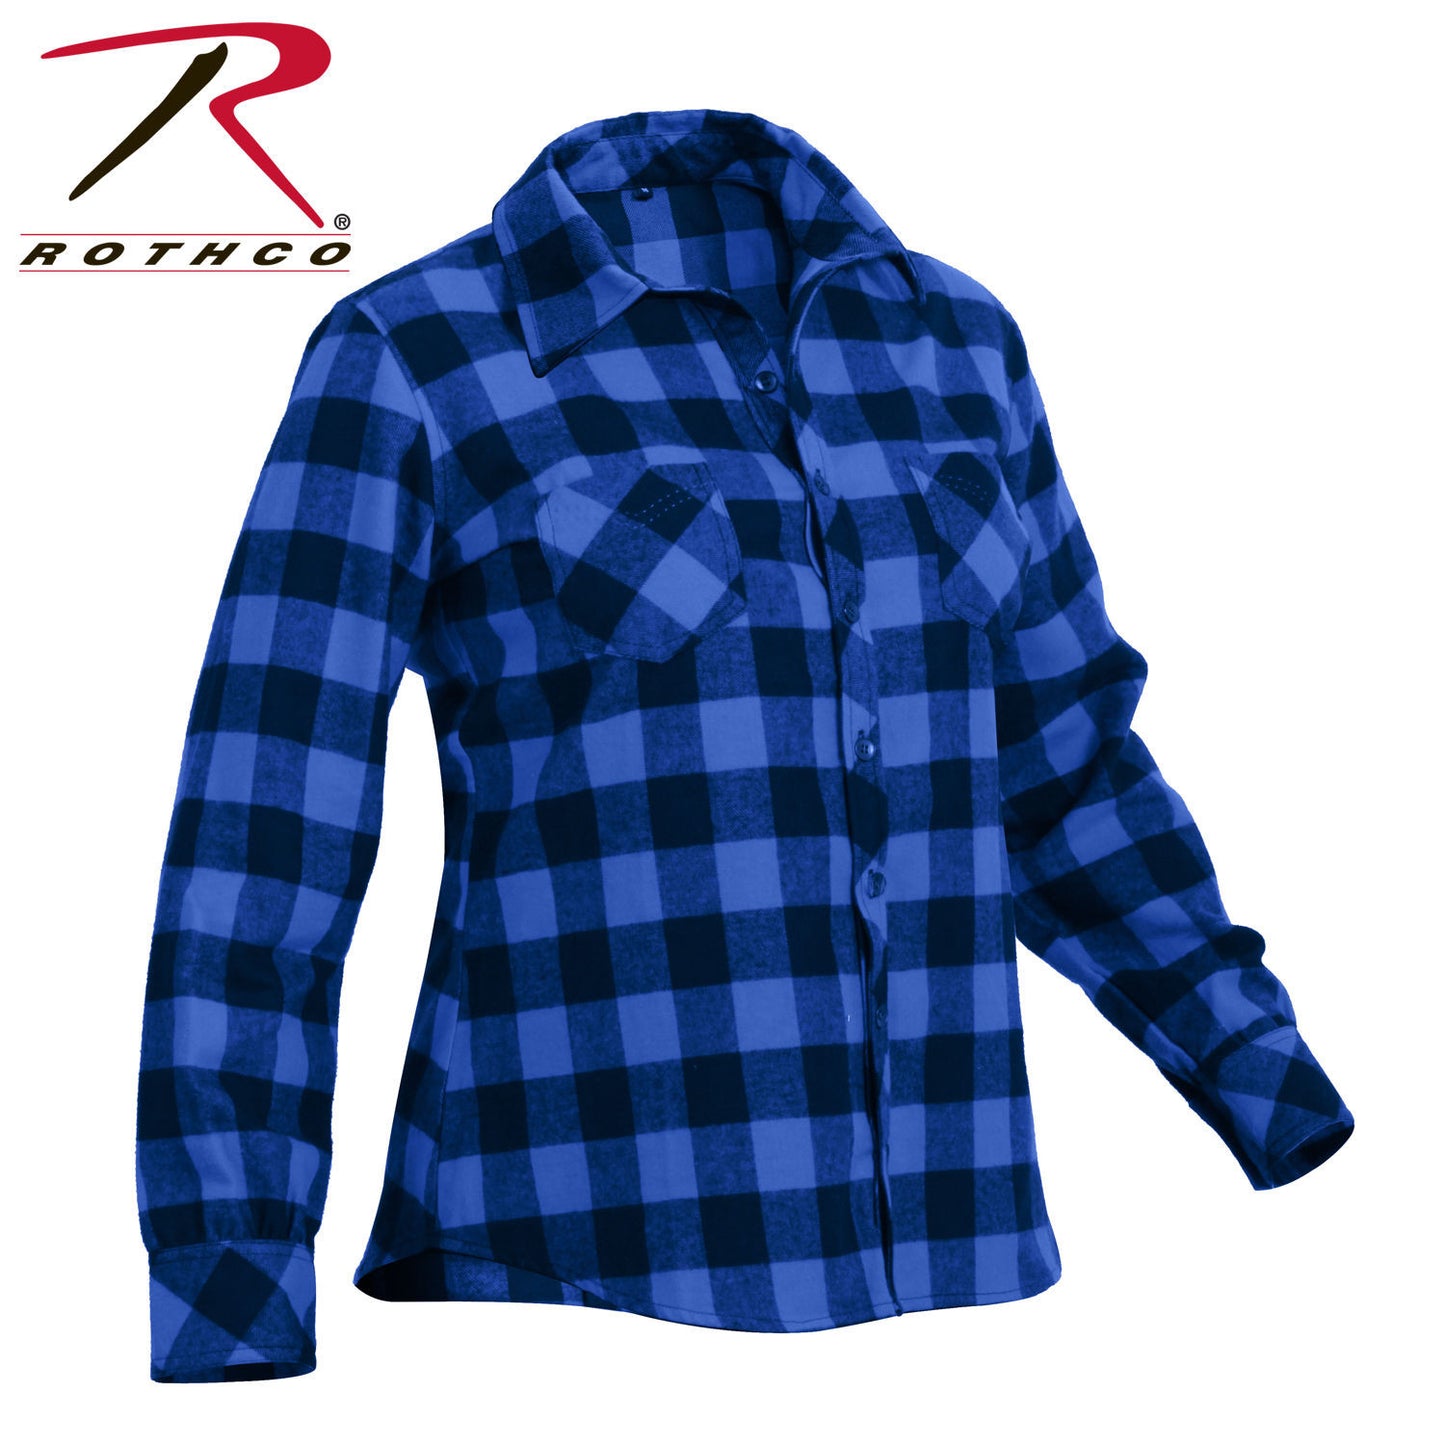 Womens Blue Plaid Flannel Shirt - Rothco 100% Cotton Button Up Top